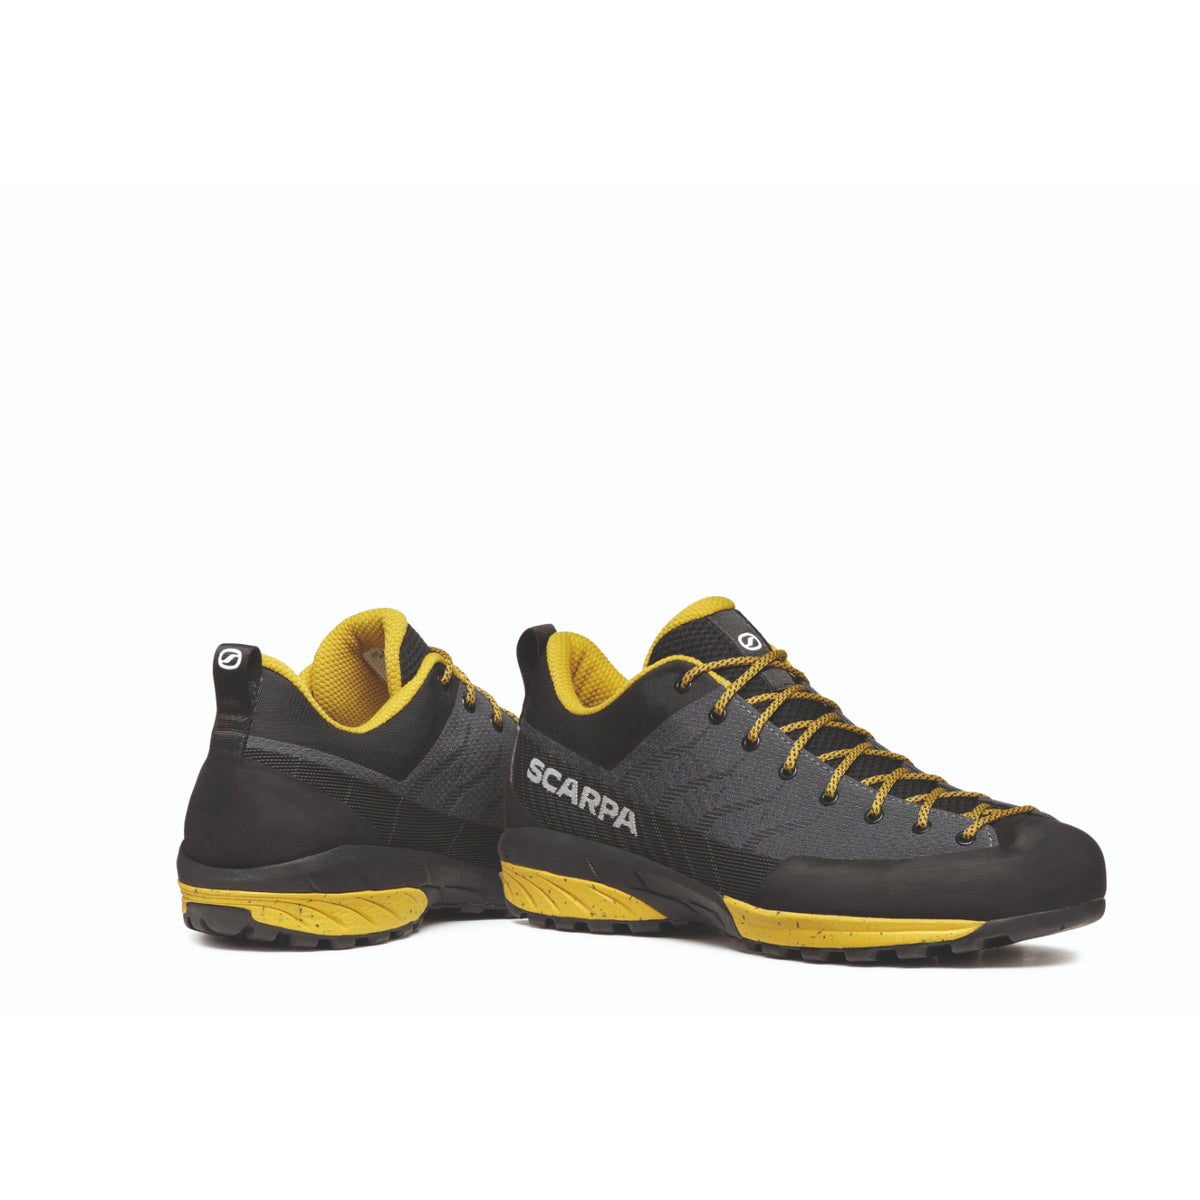 Scarpa Mescalito Planet approach shoes in grey/curry colour